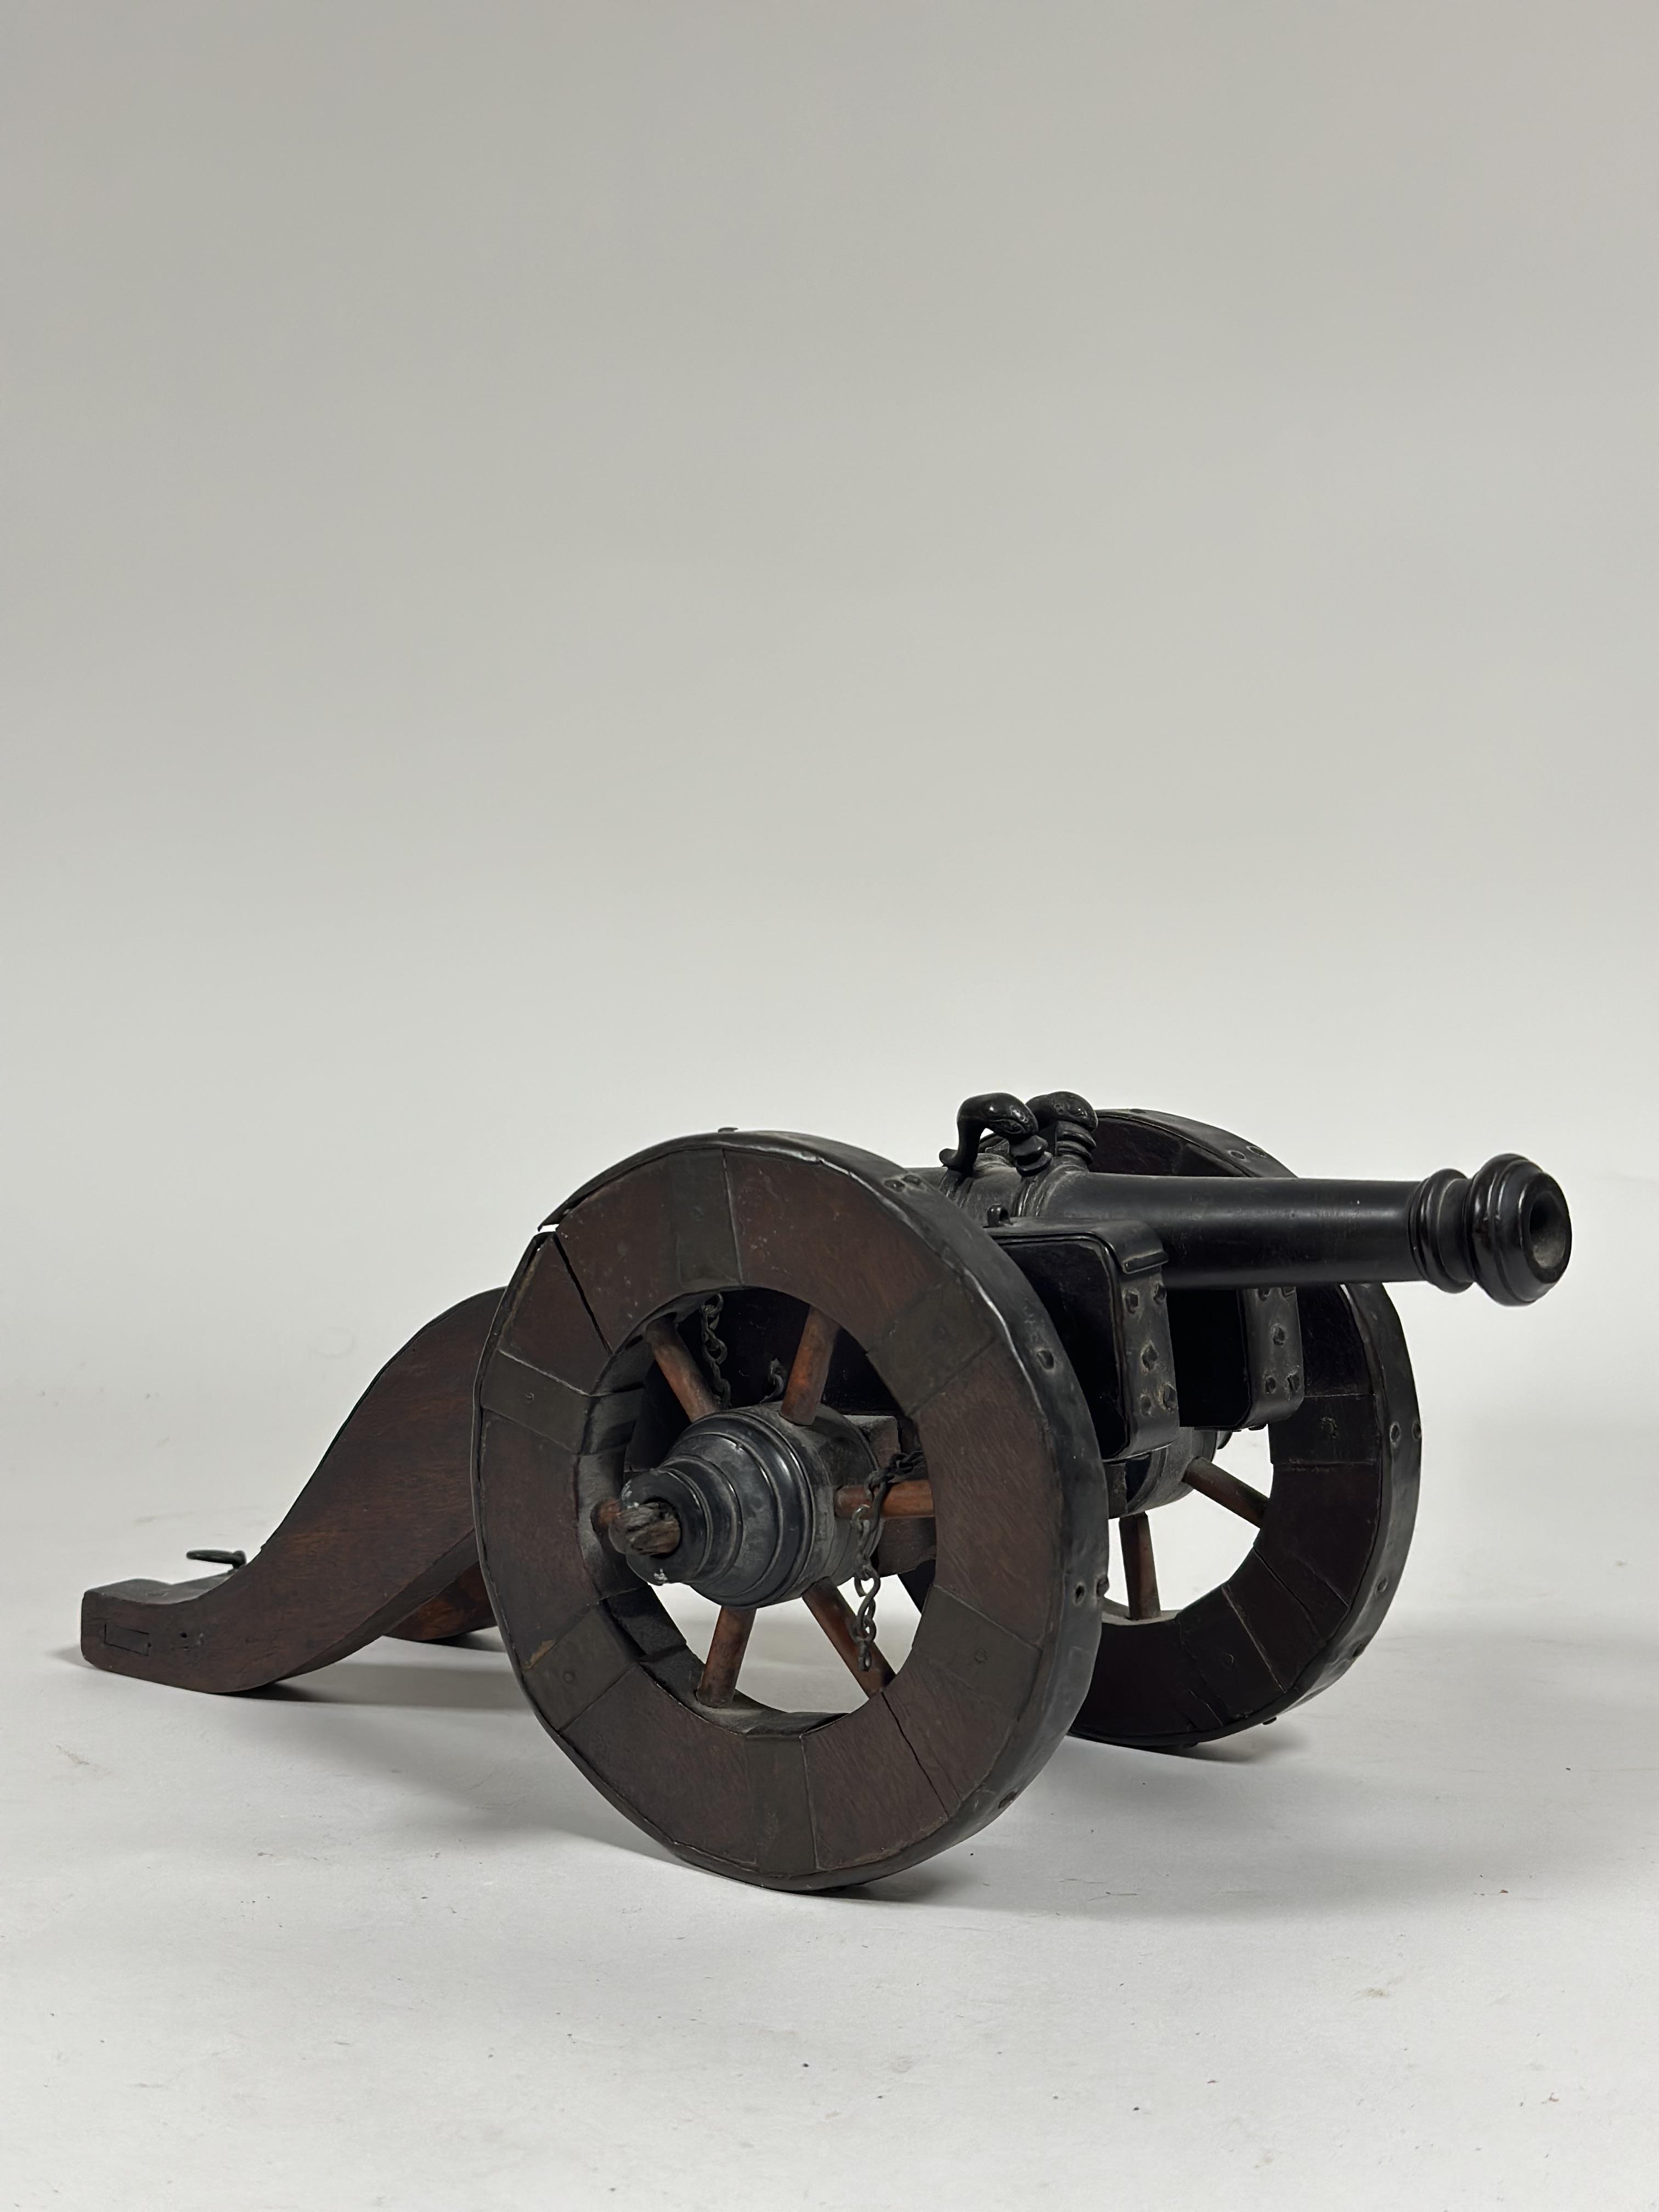 A model bronze cannon, in 17th century style, the barrel inscribed with a spurious date "Ao 1666",